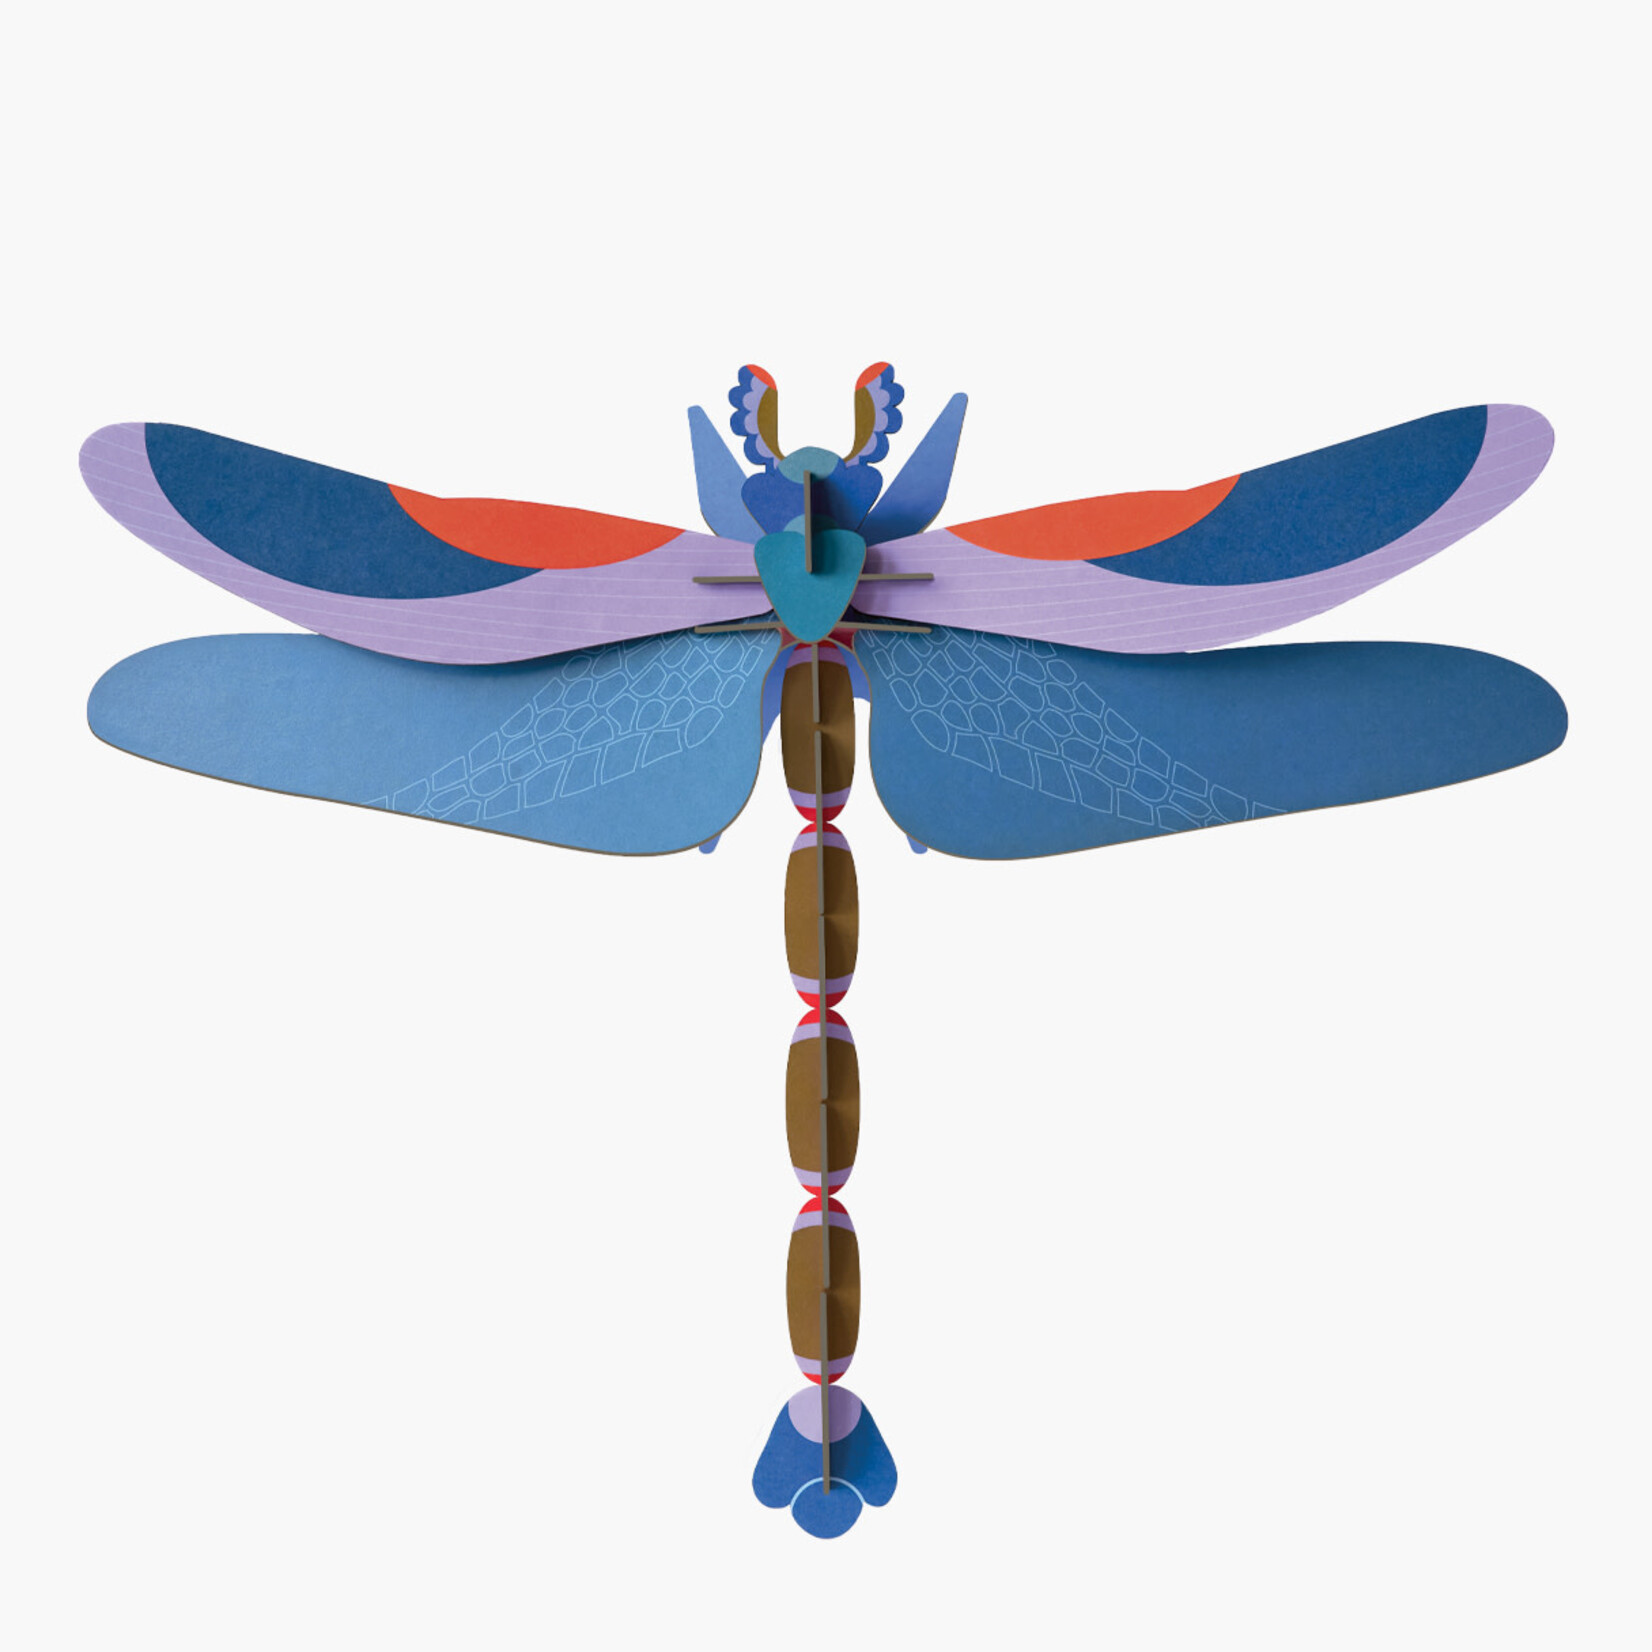 Studio Roof Studio Roof Big Insects - Blue Dragonfly